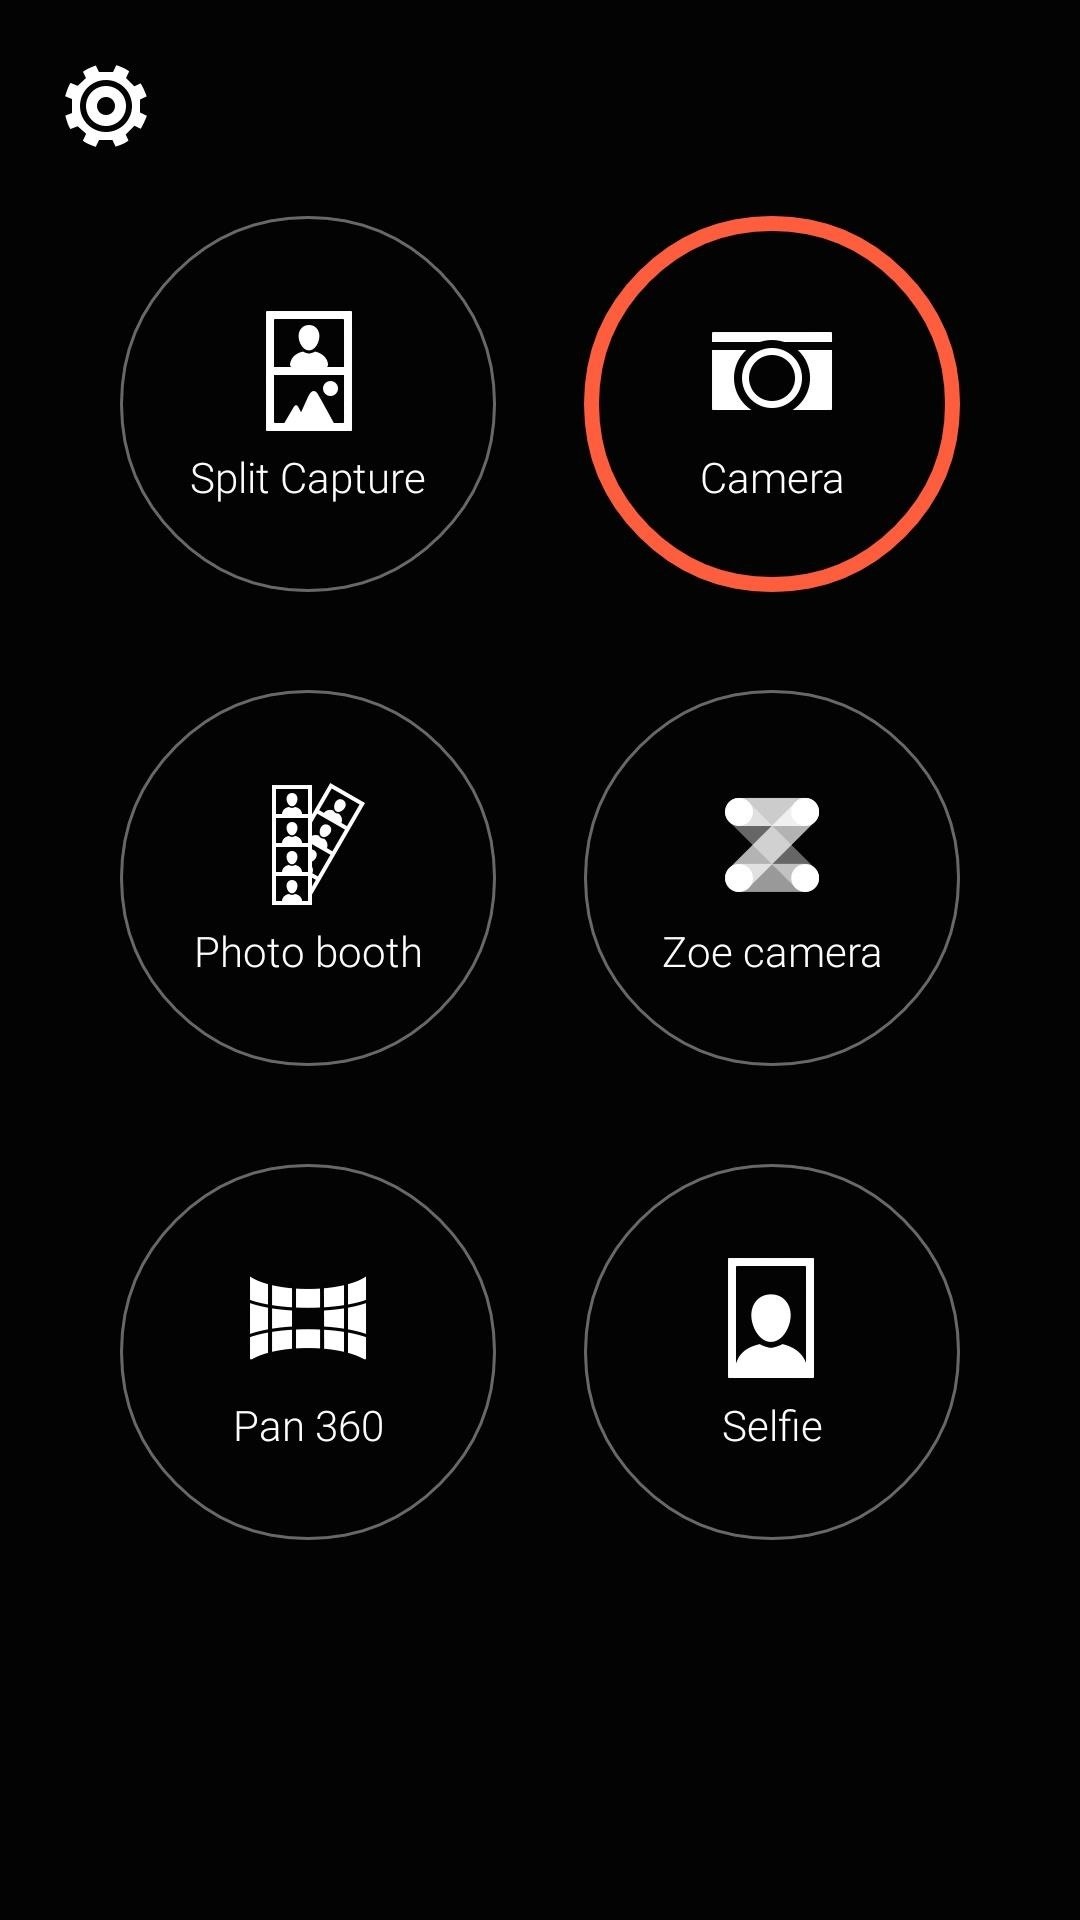 Get the Sense Camera on Your Google Play Edition HTC One M7